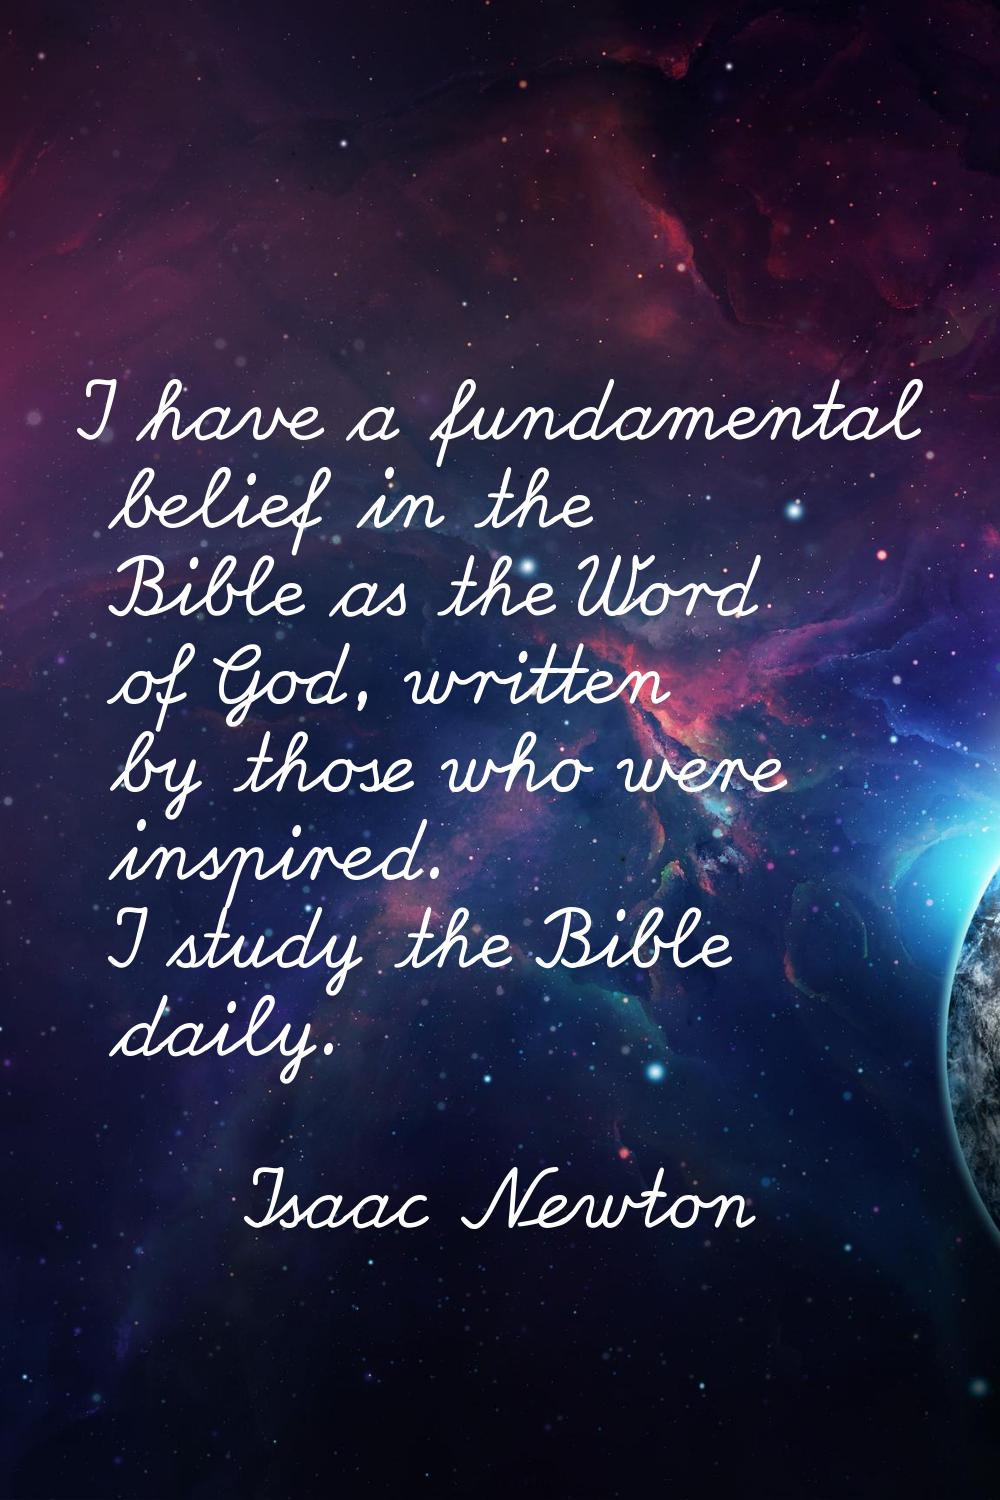 I have a fundamental belief in the Bible as the Word of God, written by those who were inspired. I 